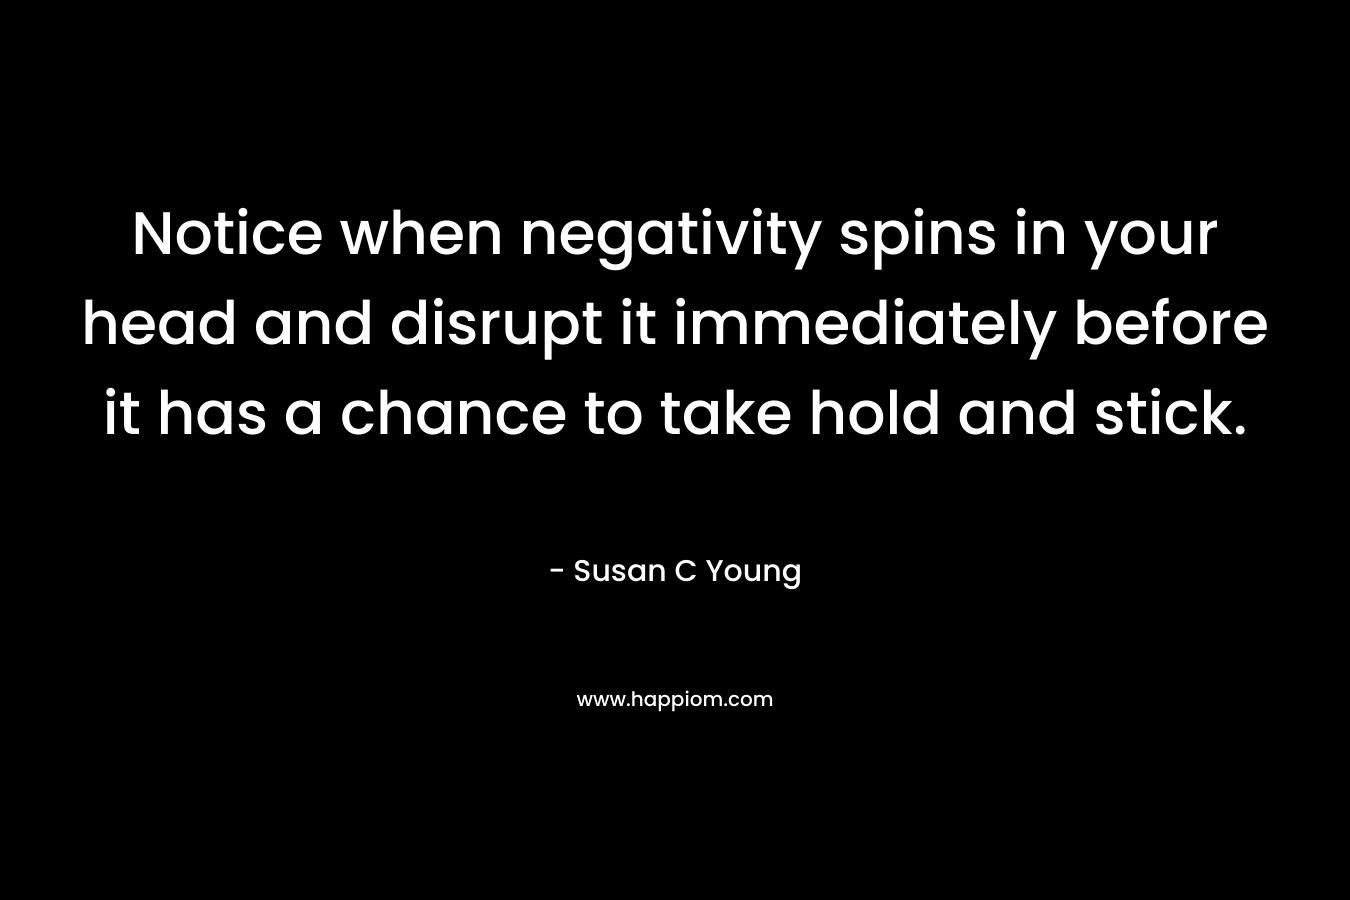 Notice when negativity spins in your head and disrupt it immediately before it has a chance to take hold and stick. – Susan C Young